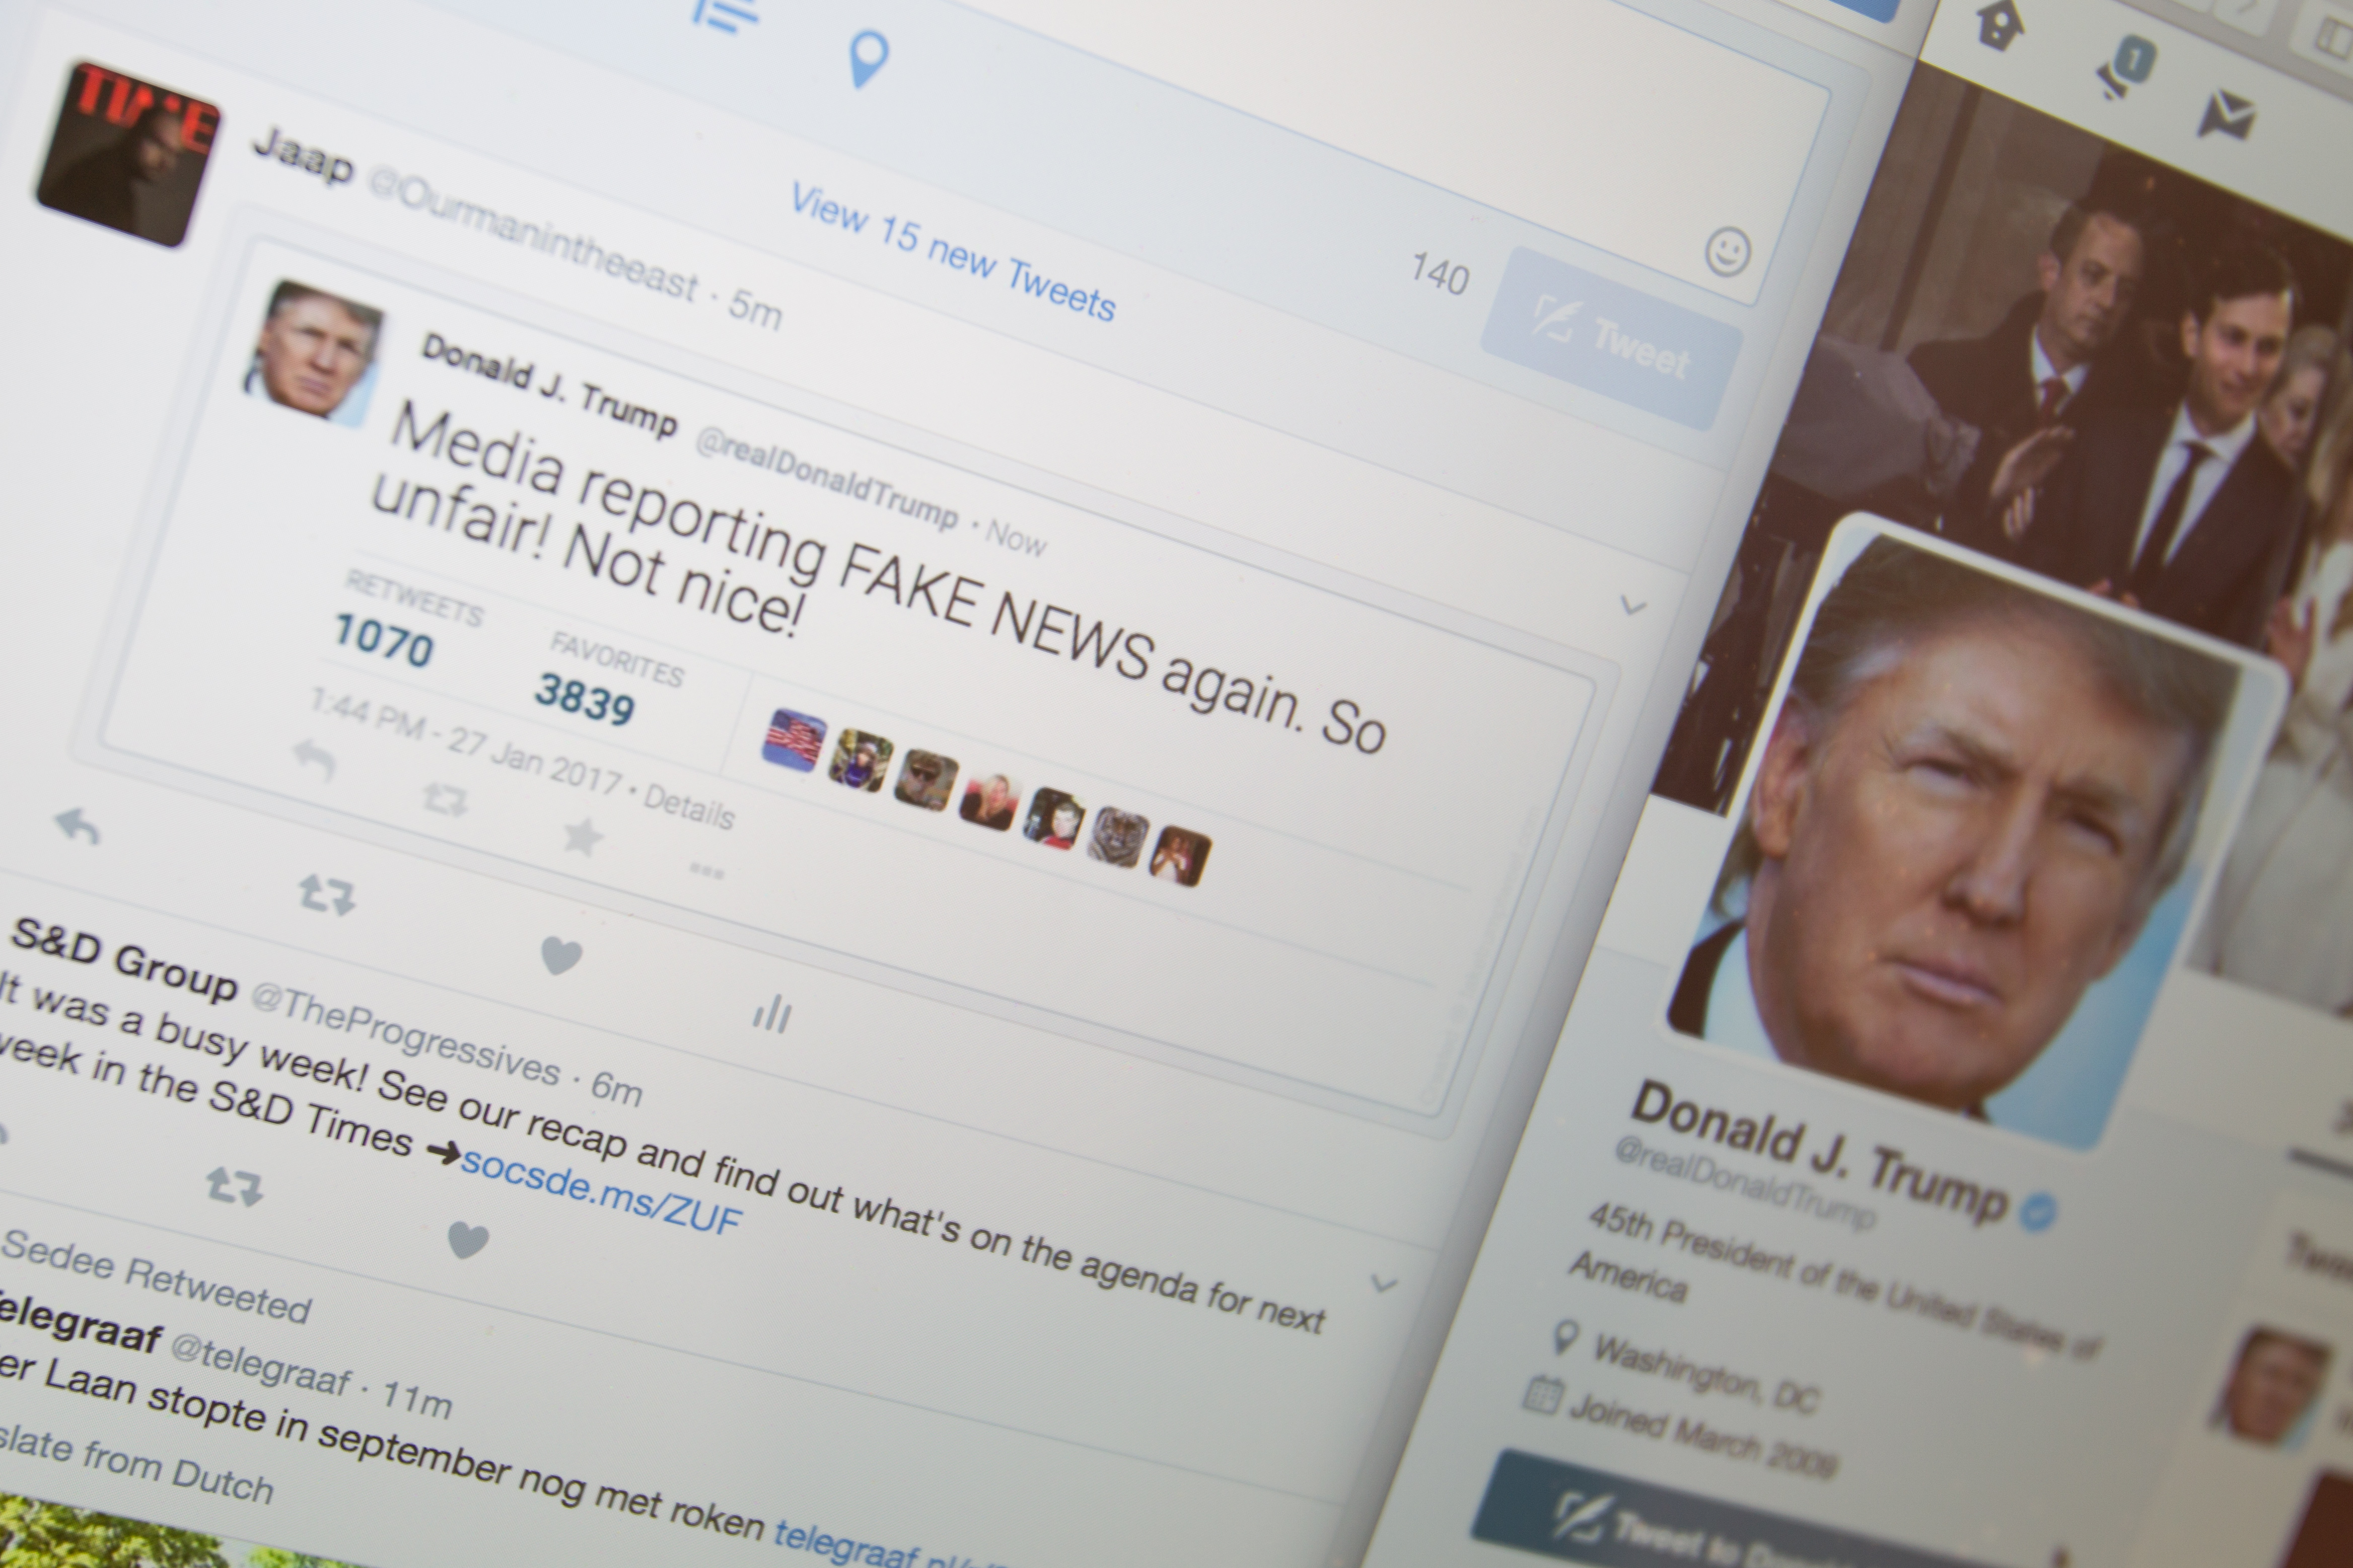 Fake Donald Trump tweets are seen in a Twitter timeline on 27 Friday, 2017. In China a site that generates fake tweets that look as if they were generated by US president Donald Trump are being used to mock the president. (NurPhoto—NurPhoto/Getty Images)